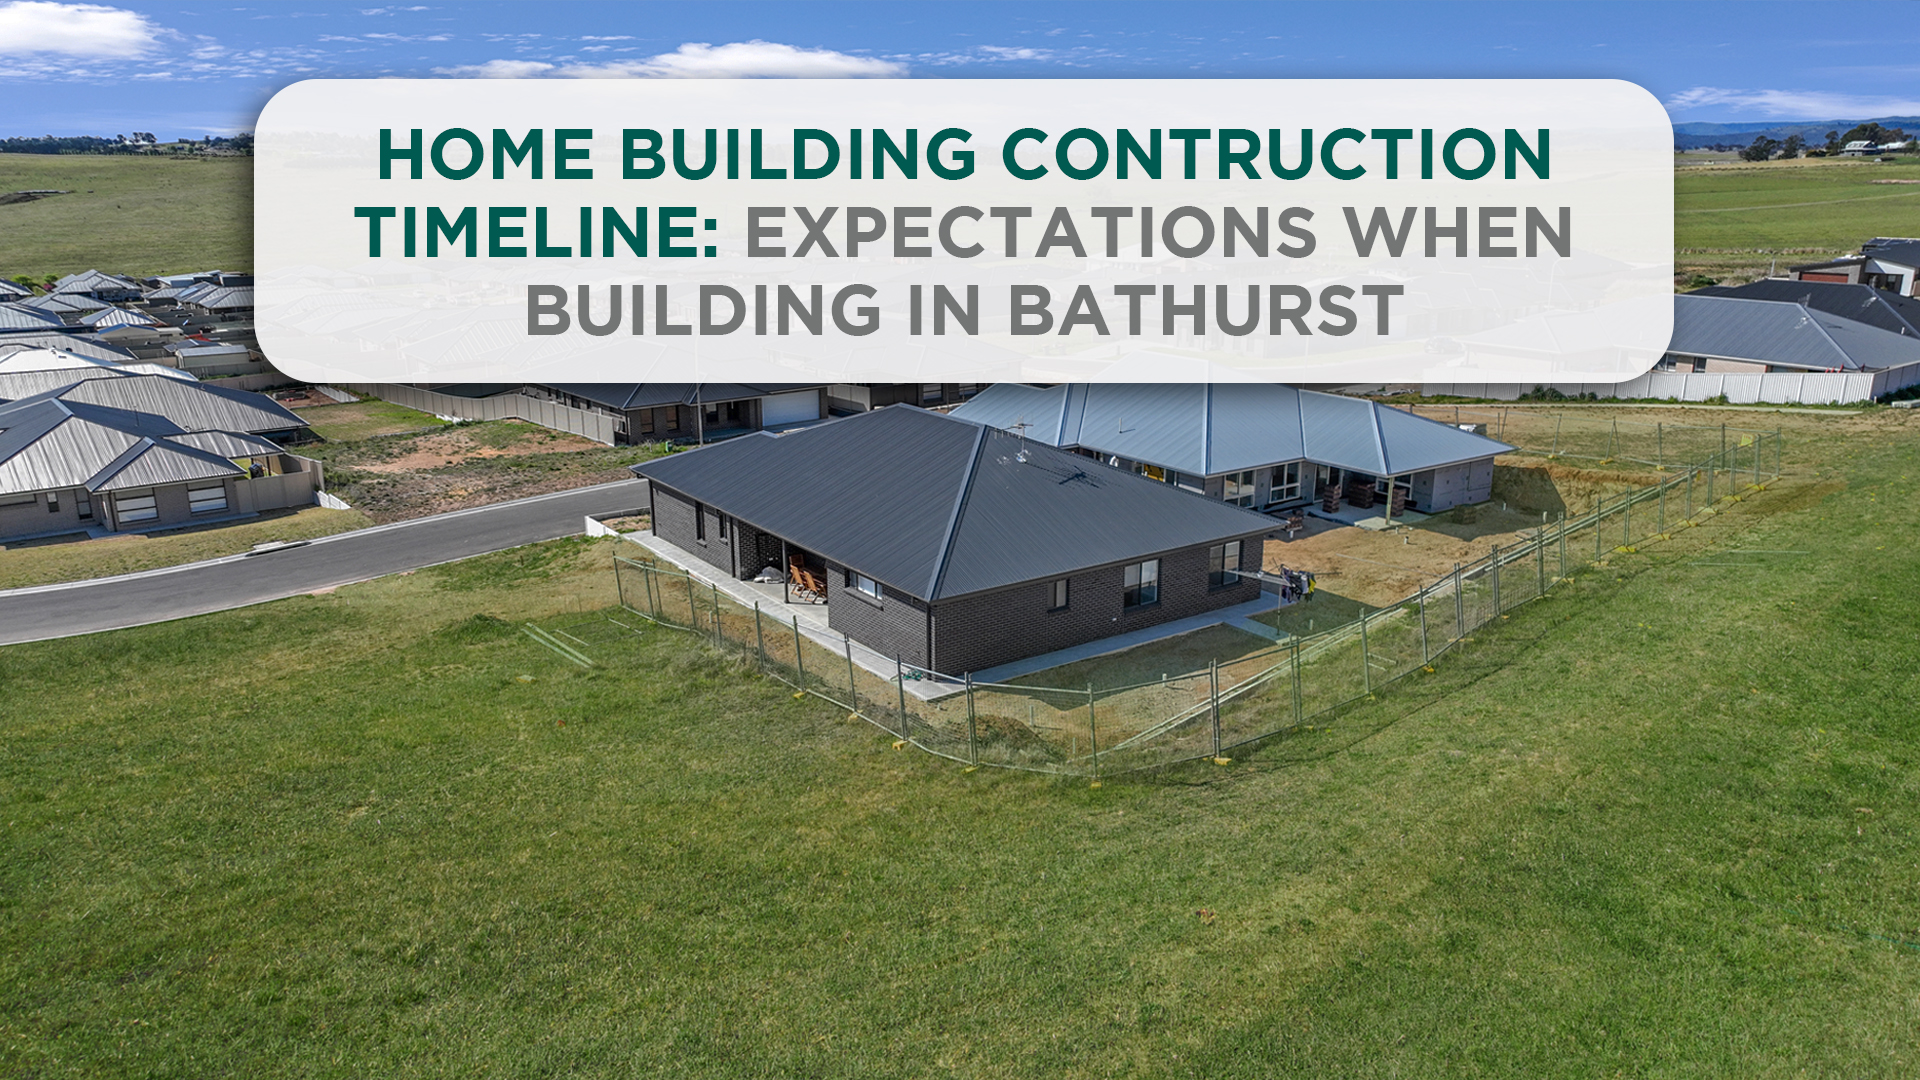 Home Building Construction Timeline: Expectations When Building in Bathurst